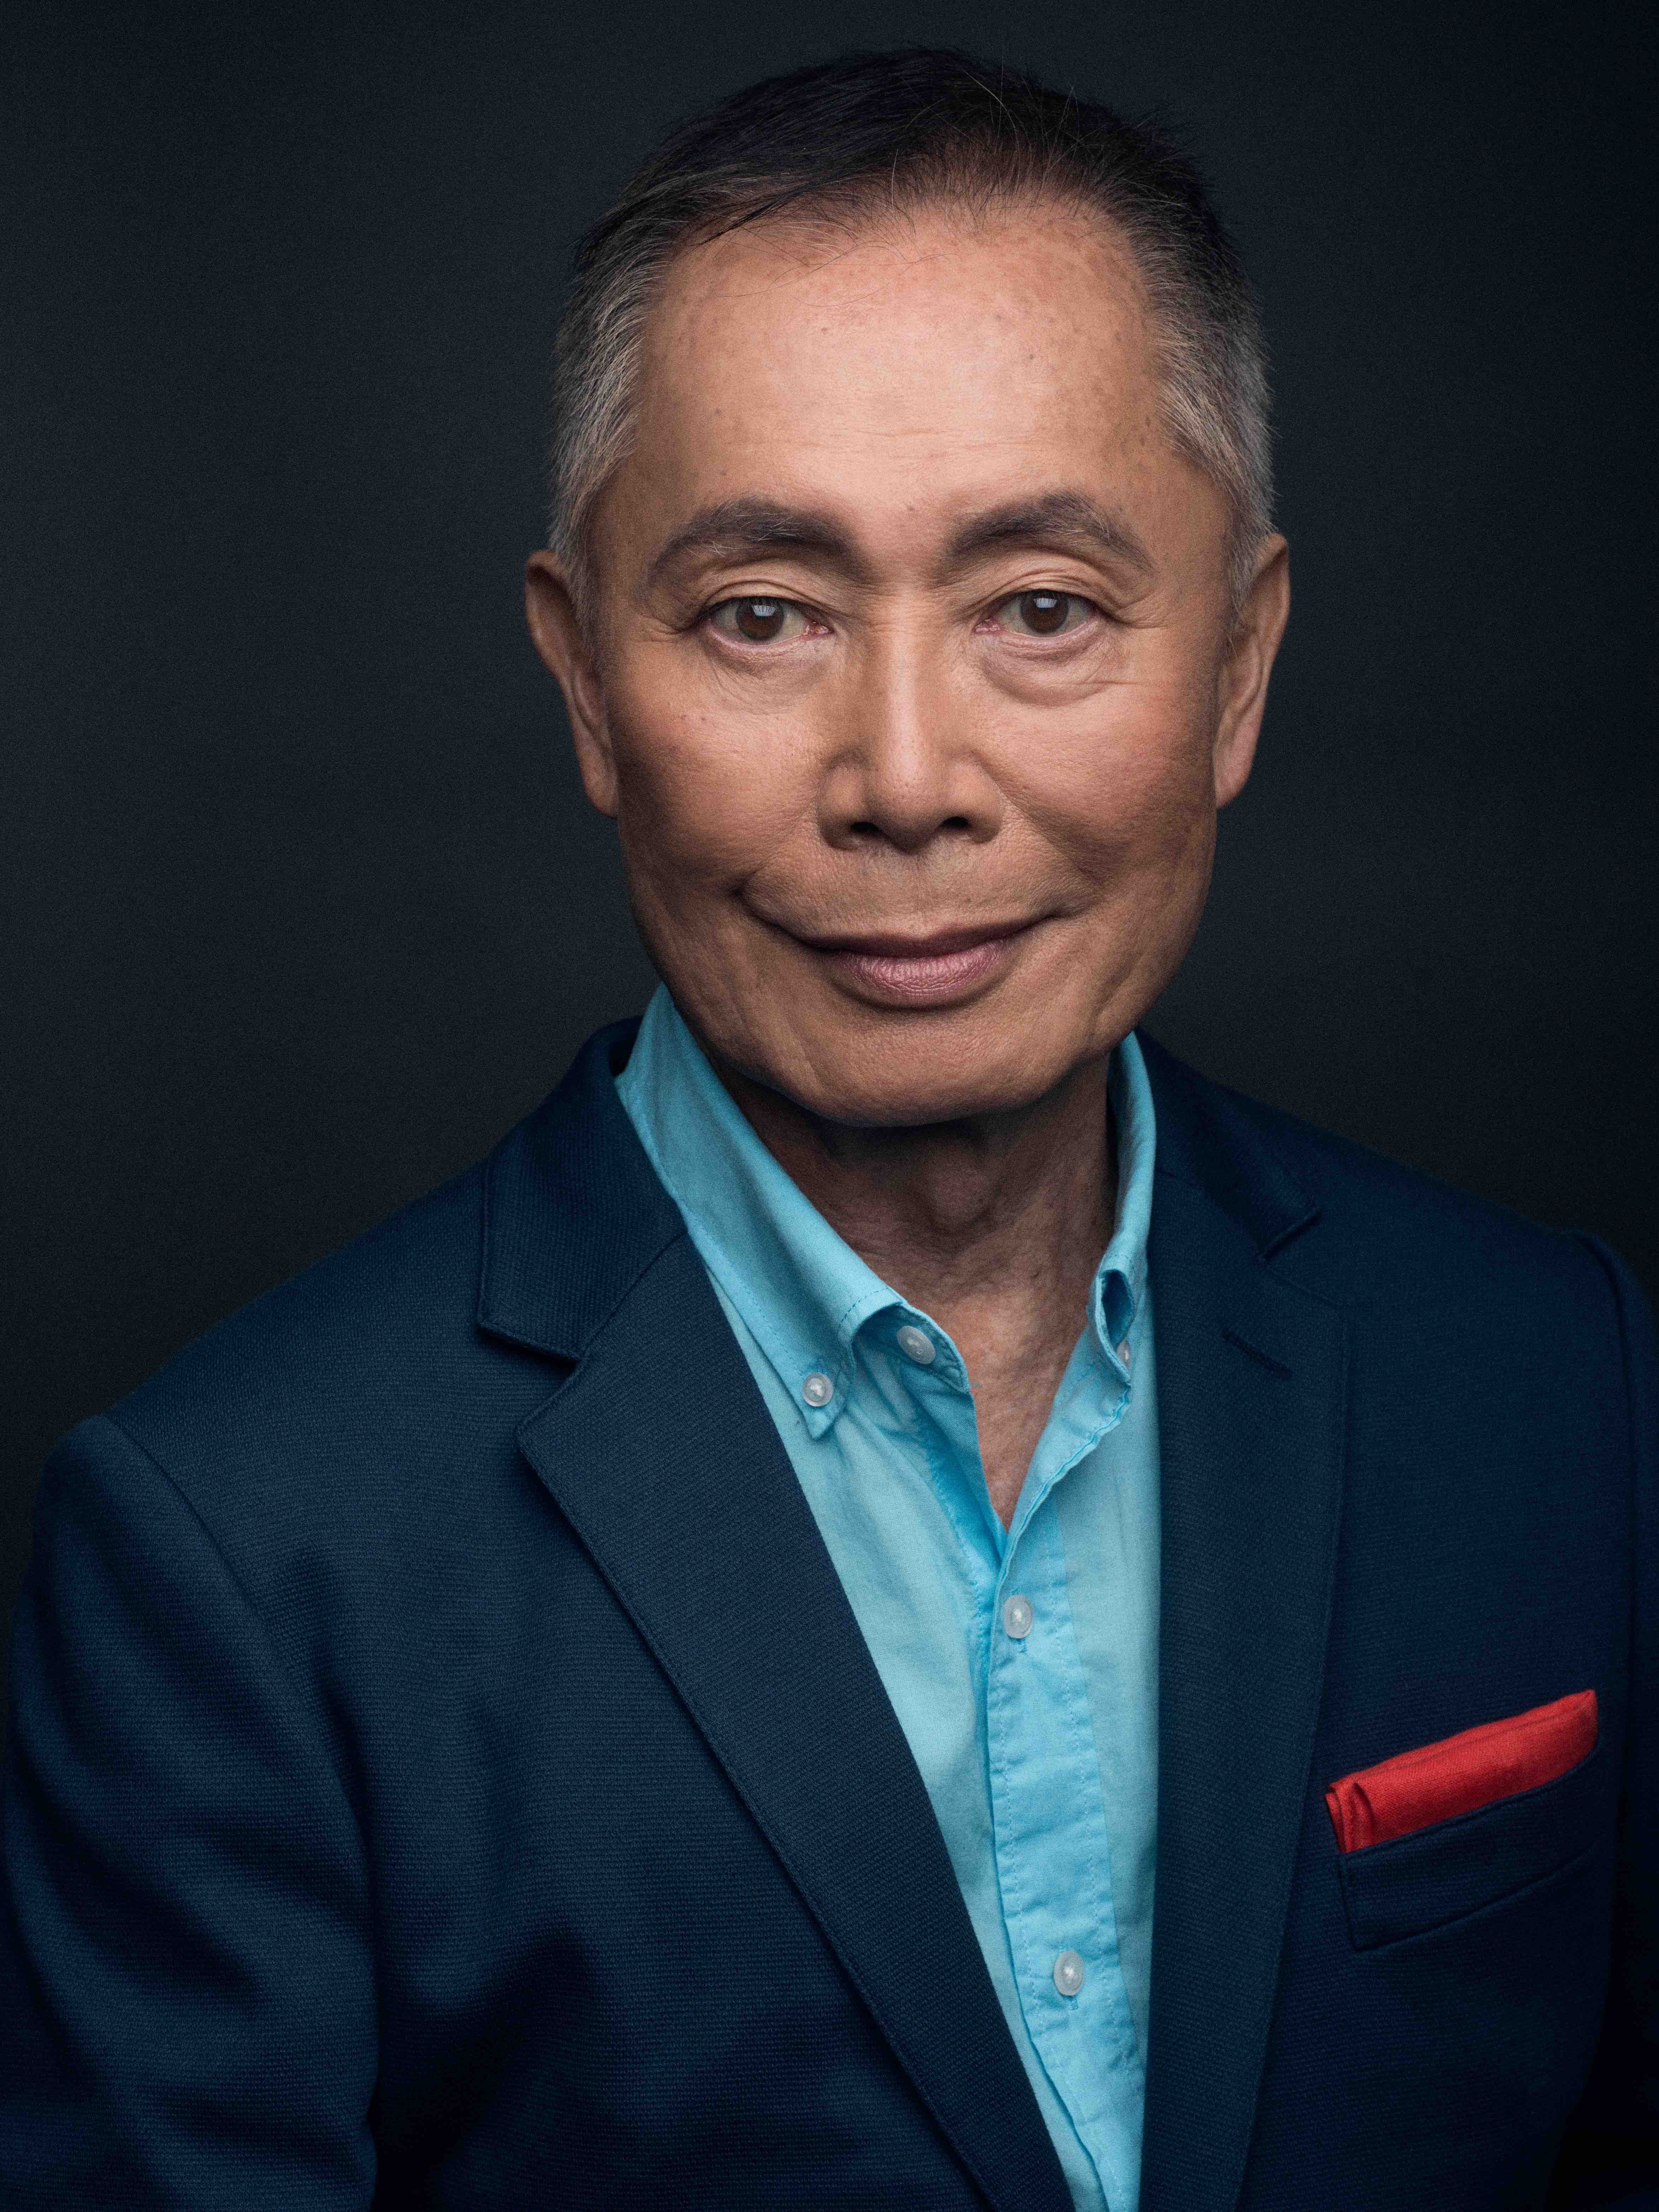 Five questions for George Takei